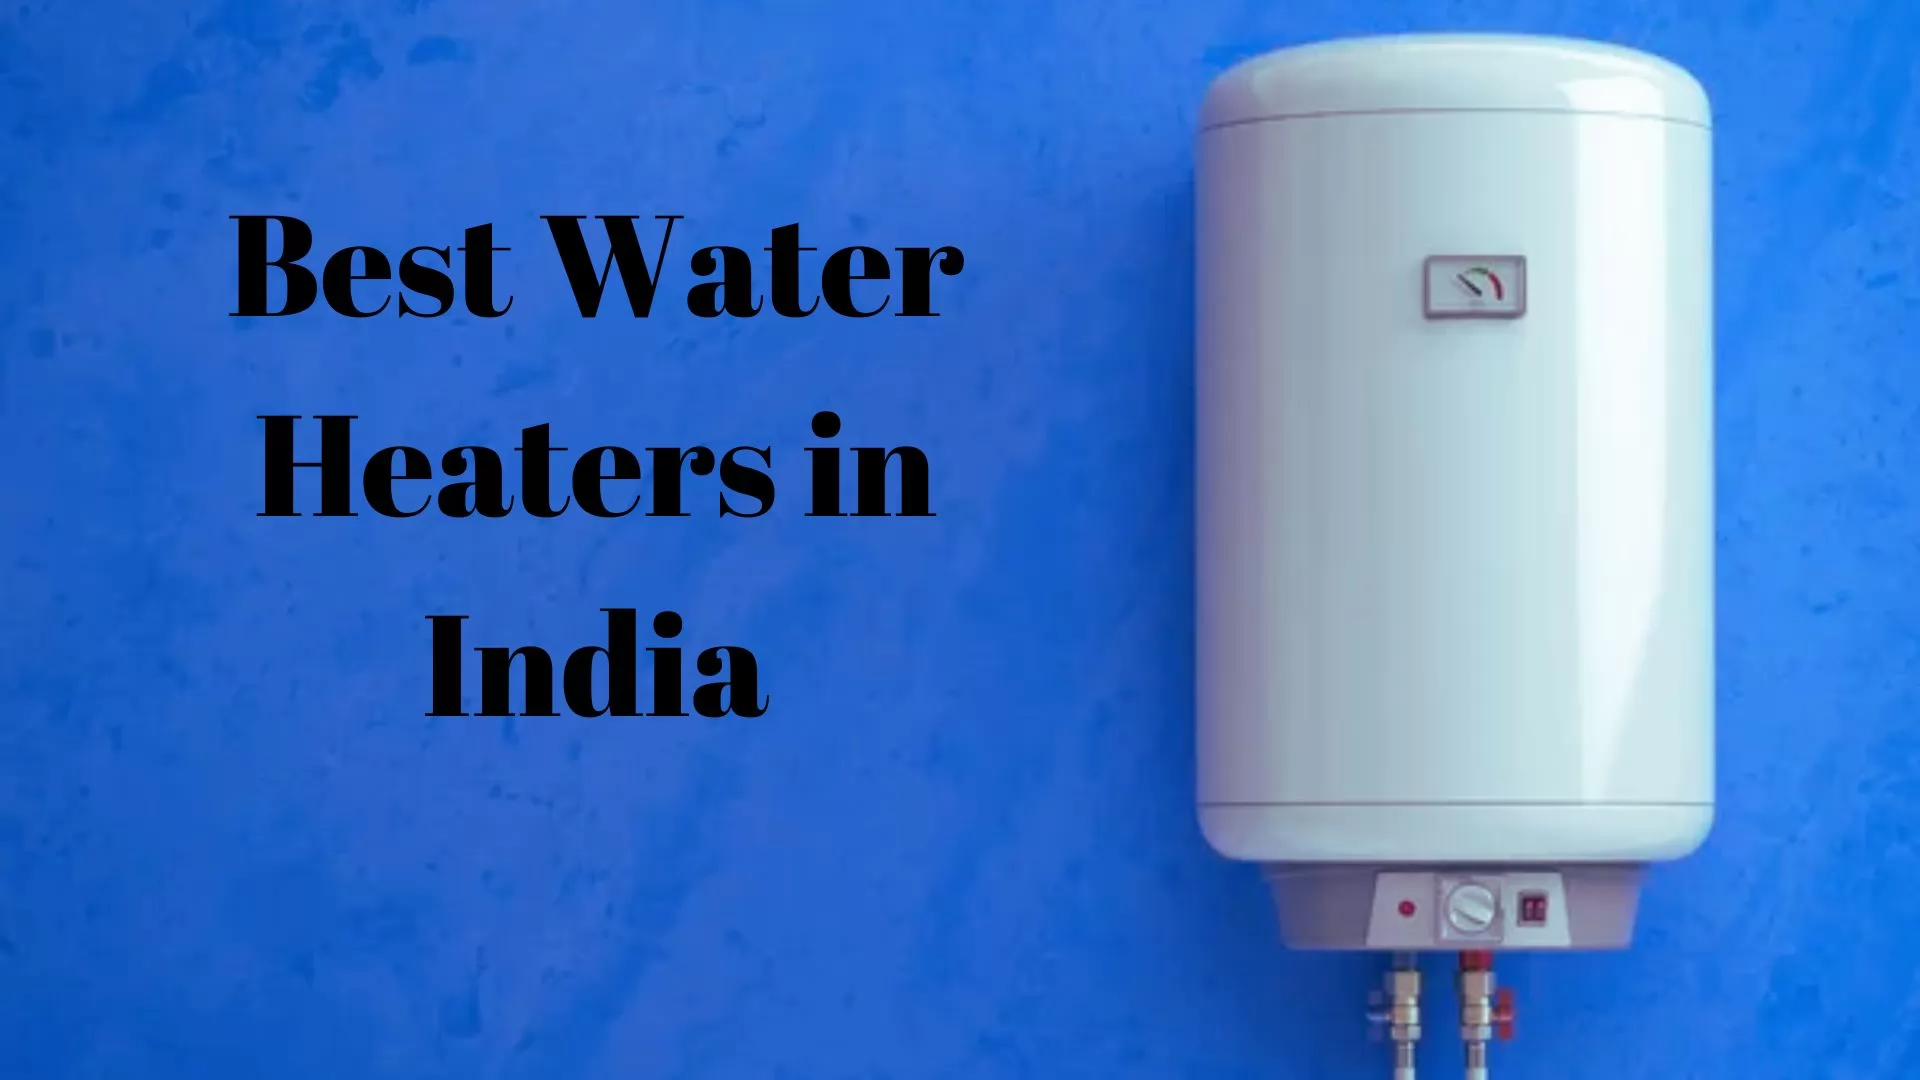 Best Water Heaters in India